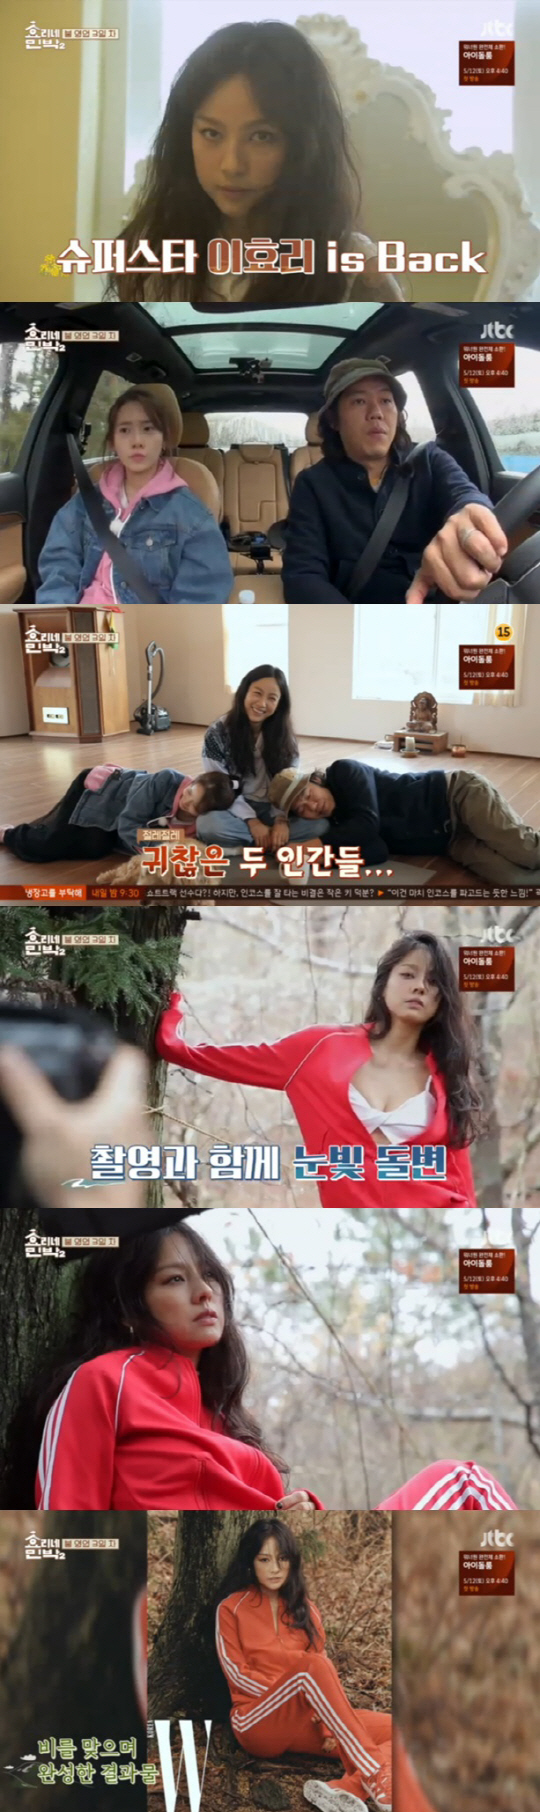 On the 6th, JTBC Hyorine Guest House 2, Lee Sang-soon and Im Yoon-ah were shown trying to fill the vacancy of Chairman Lee Hyori. On the 3rd day of the operation of the spring Guest house, Lee Hyori, He got up early in the morning and prepared his handmade expenses for breakfast.After all the guests left for a tour of Jeju Island, Lee Hyori, who was ready to go out, left the Guest house to Lee Sang-soon and Im Yoon-ah and left for the photo shoot.Lee Sang-soon and Im Yoon-ah, who were left in the Guest house, cleaned up and prepared to meet a new guest.New guests, from friends to family of four, visited two teams in succession for 15 years, but Lee Sang-soon and Im Yoon-ah welcomed guests without panic.We have been working on a welcome drink with fast hands, familiarizing with Guest house rules and house introductions, and solving Guest house work.The two men admired Lee Sang-soon and Im Yoon-ah, who had both visited Jeju Island for a trip together and went out to see the market and bought breakfast materials. On the way back from the market, Lee Hyori surprised Lee Hyori at a waiting place for a photo shoot.The two were surprised by the appearance of Lee Hyori, who transformed into a charismatic Superstar from head to toe with intense smokey makeup, not a comfortable and friendly chairman at the Guest house.Lee Hyori, on the other hand, said to the two people who followed him to the photo shoot, Go away and Jindeuk (?)Lee Hyori took a picture professionally in outdoor shooting in rainy weather, talked with the staff with a serious expression, and was full of charisma.